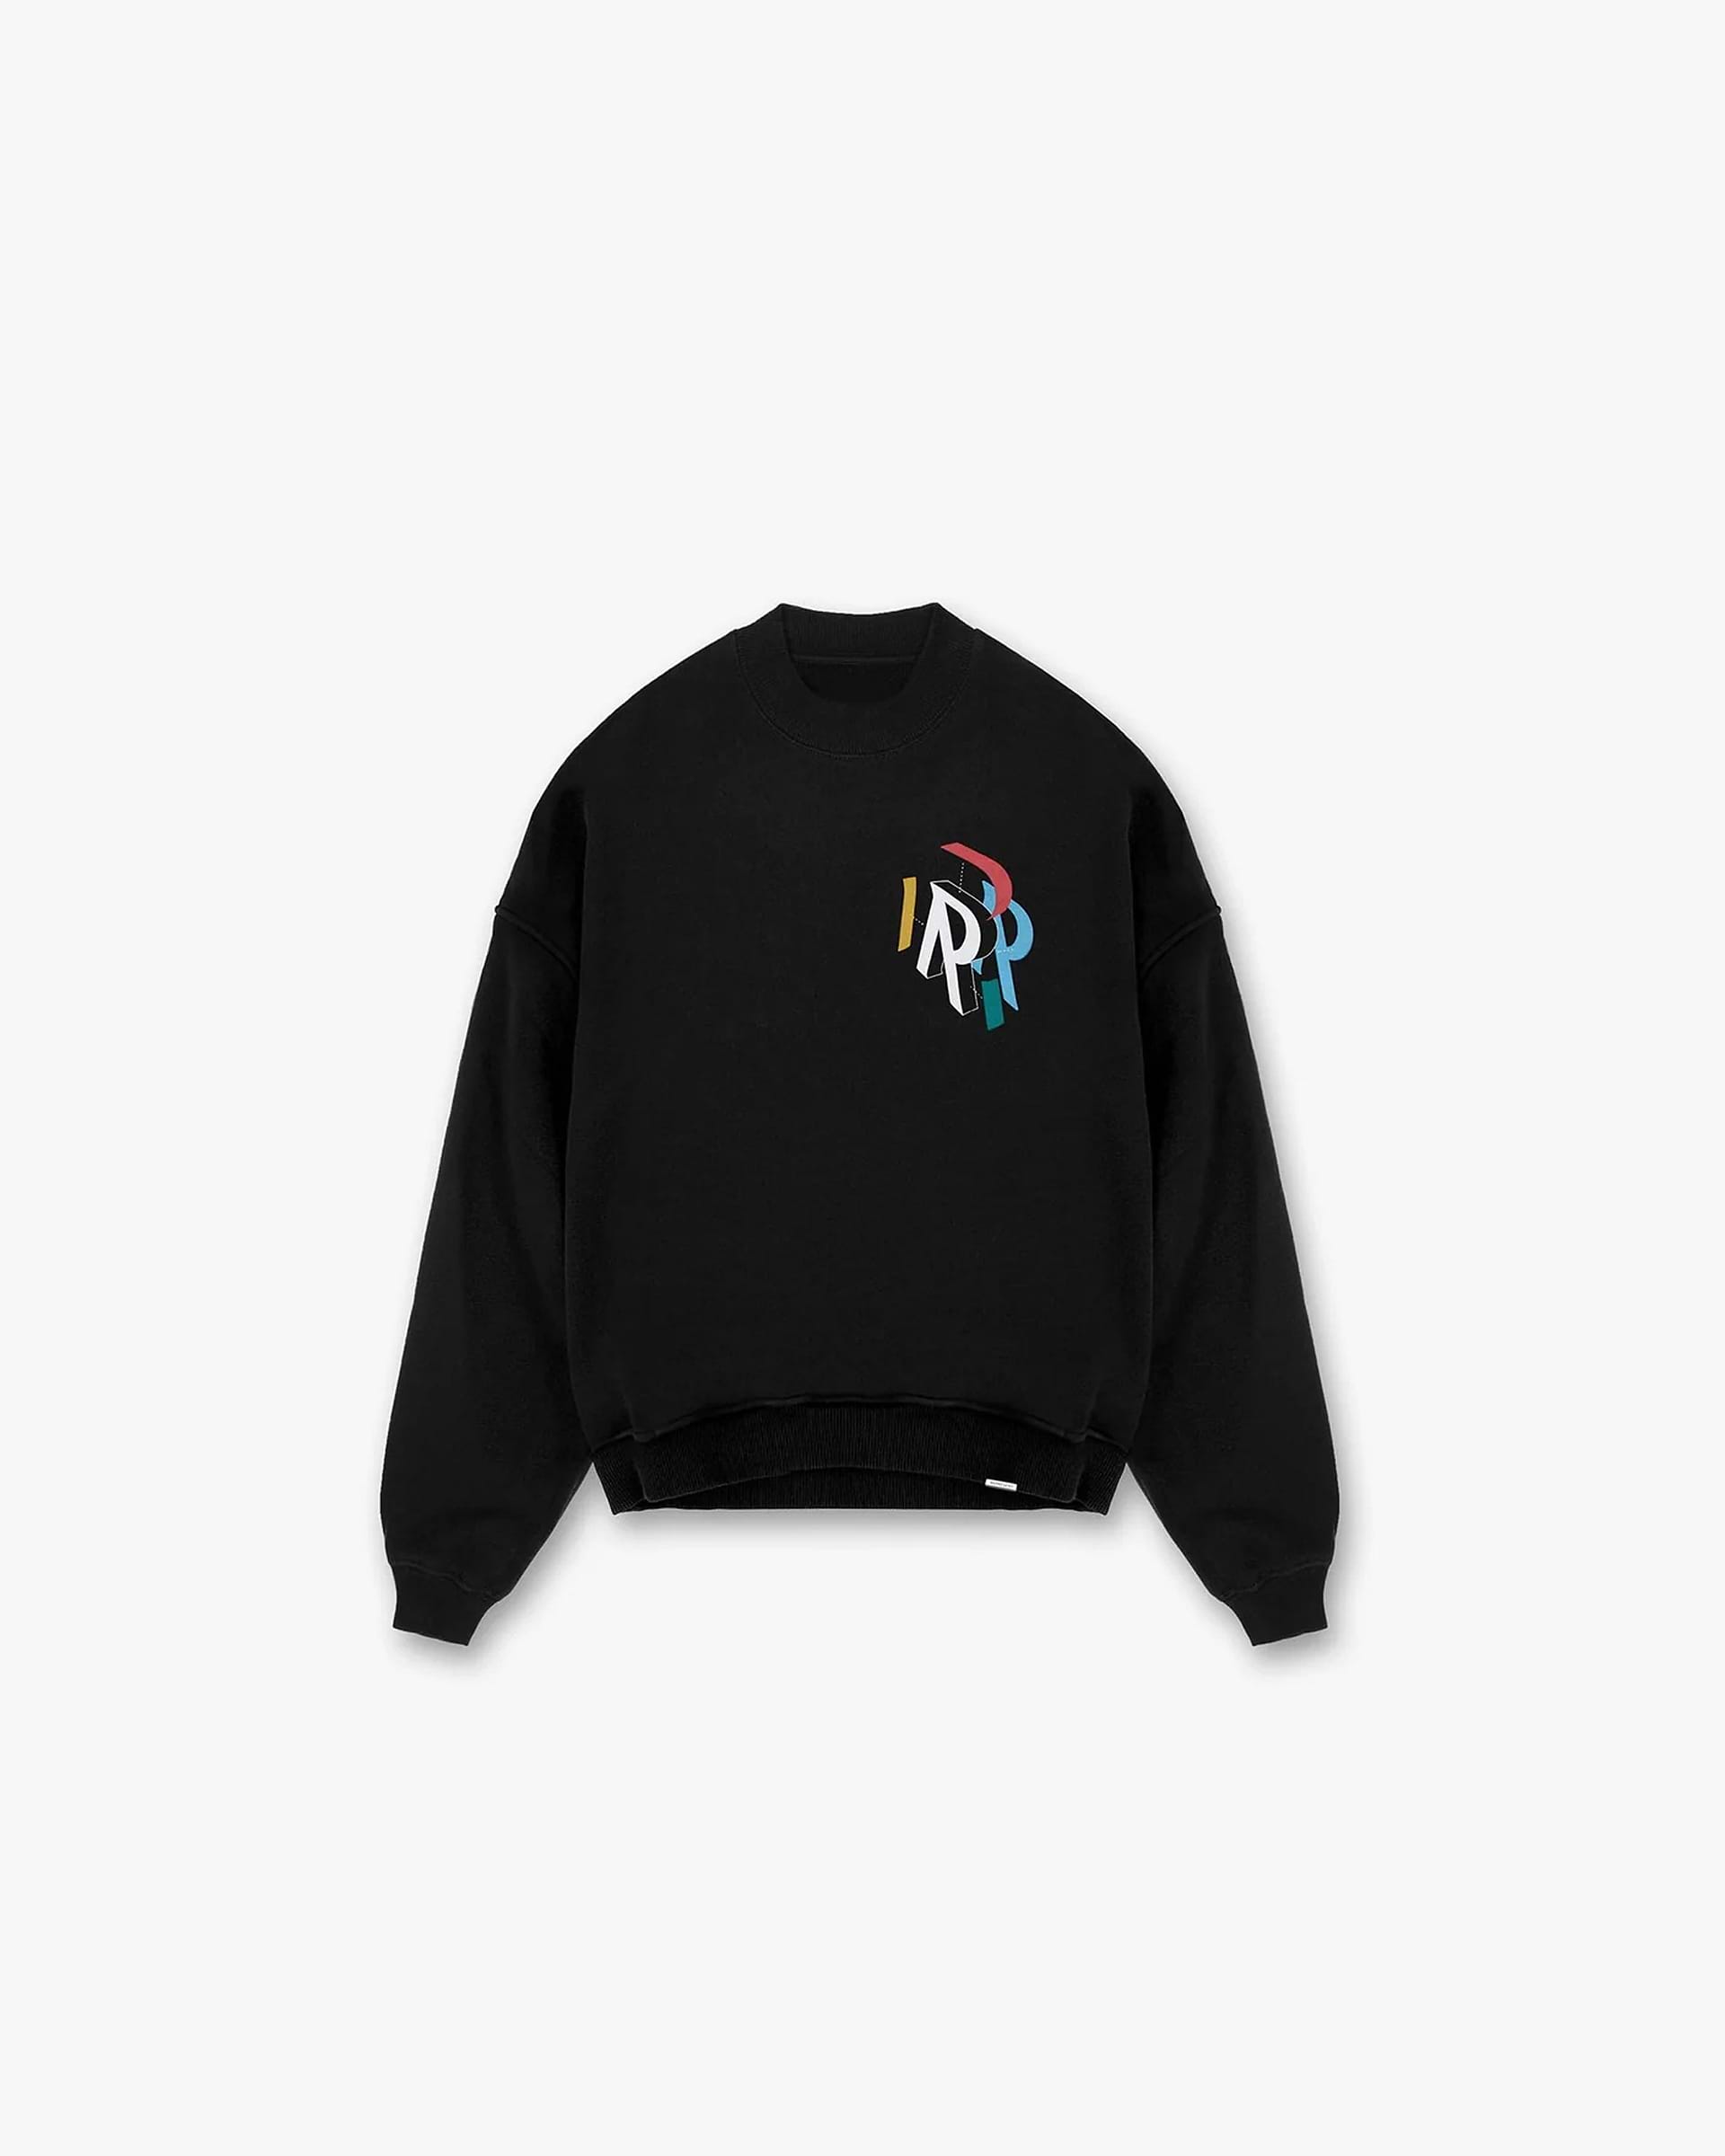 Initial Assembly Sweater | Black Sweaters SS23 | Represent Clo